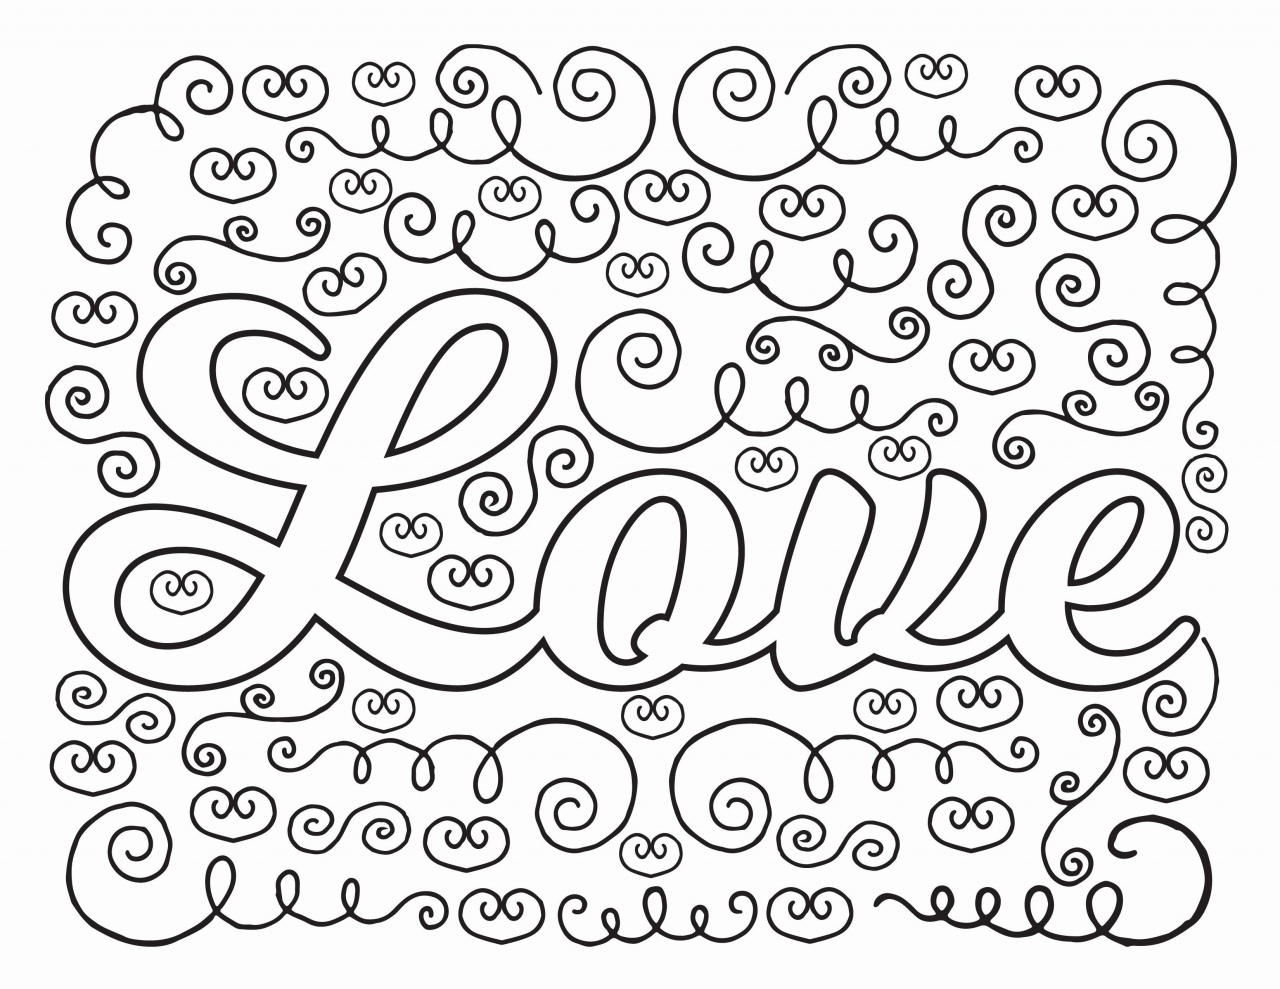 Wedding Activity Coloring Pages Kids Coloring Pages For Weddings Printable Coloring Page For Kids